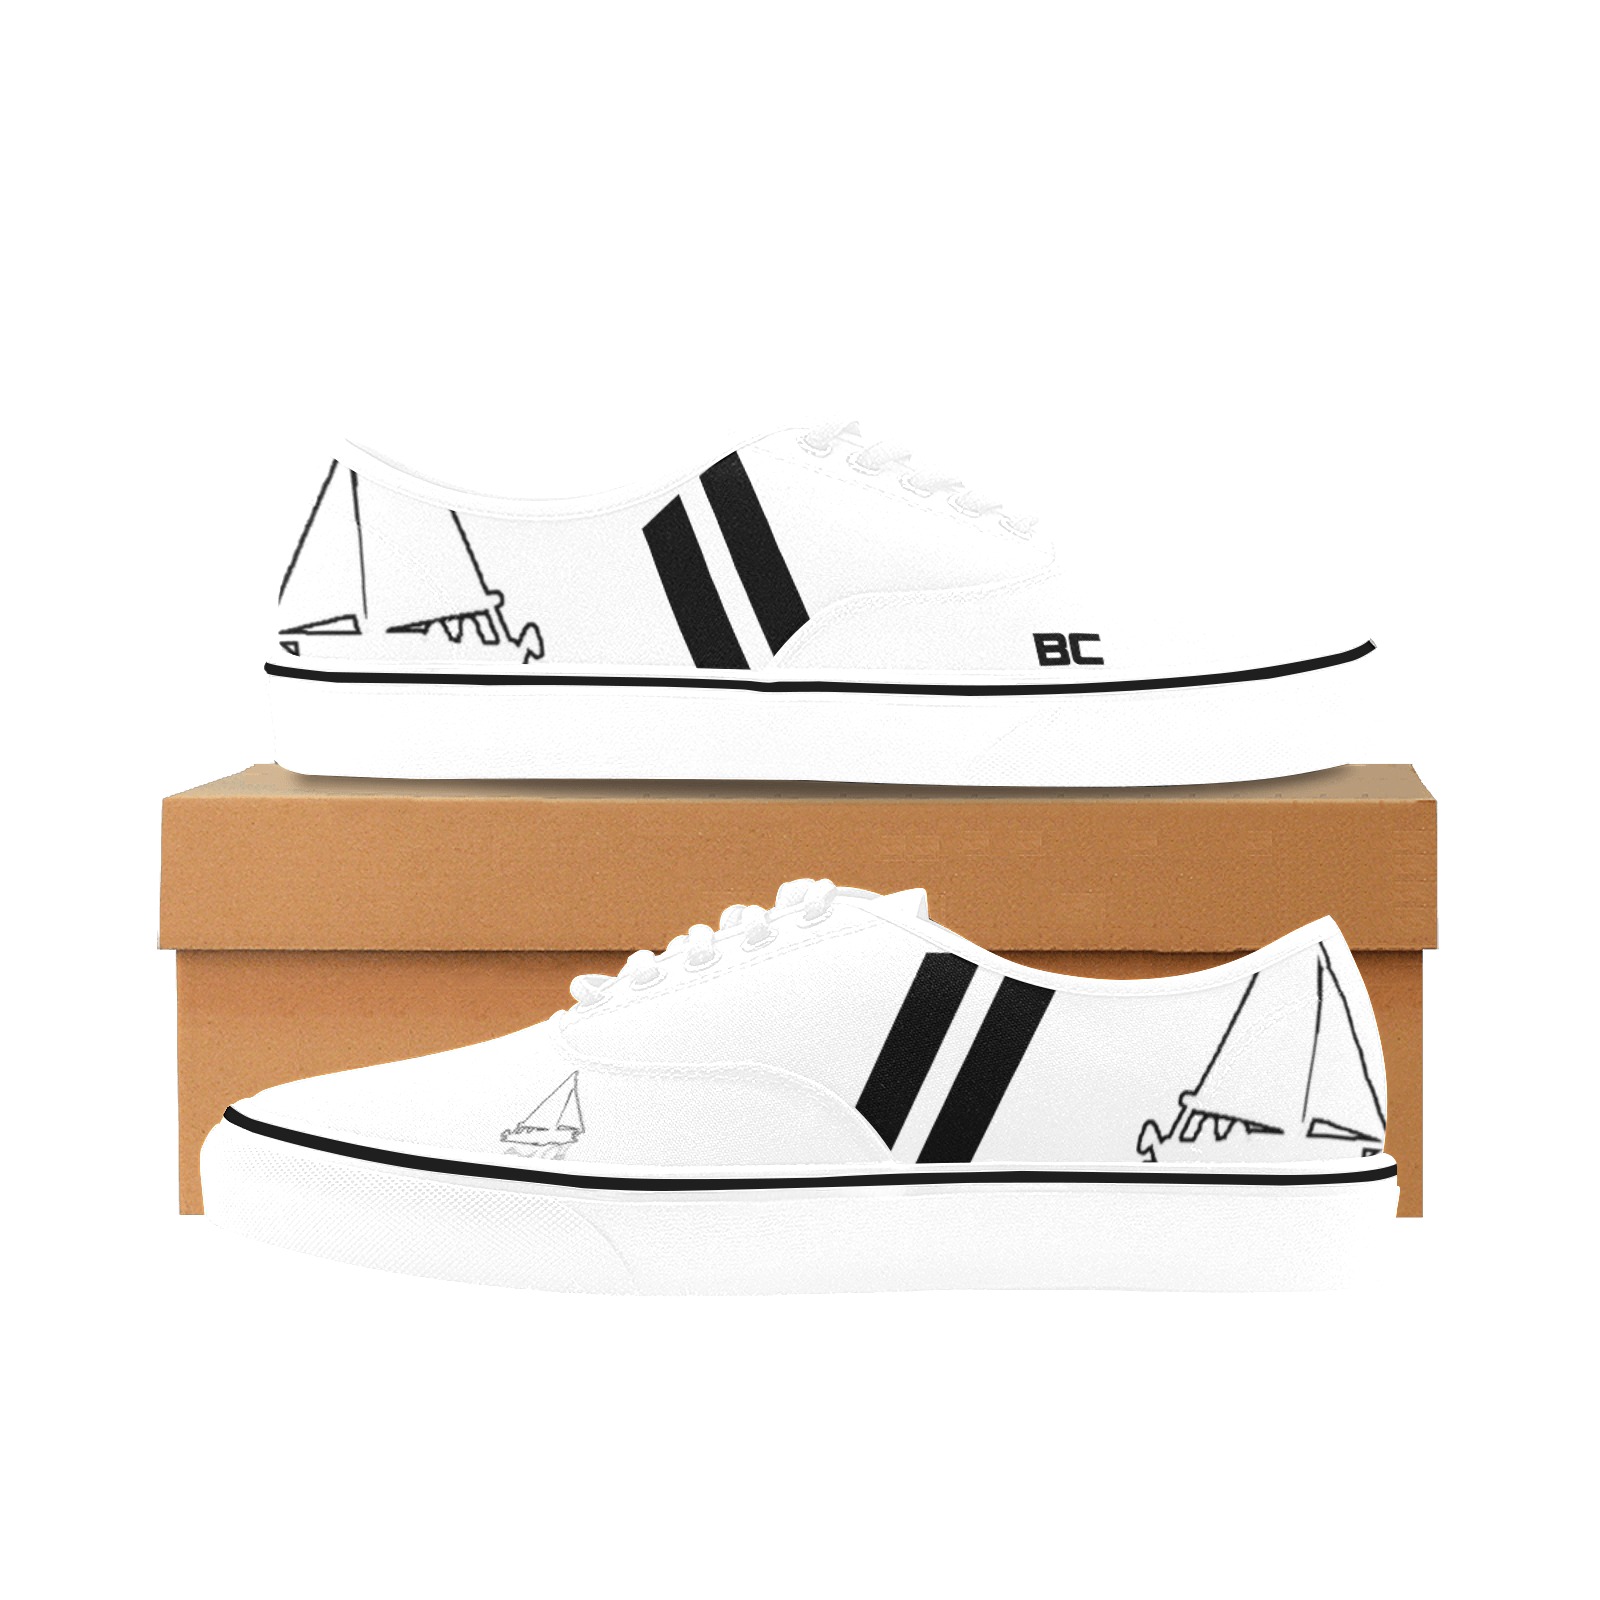 Boat Club Walkers 2 Classic Women's Canvas Low Top Shoes (Model E001-4)